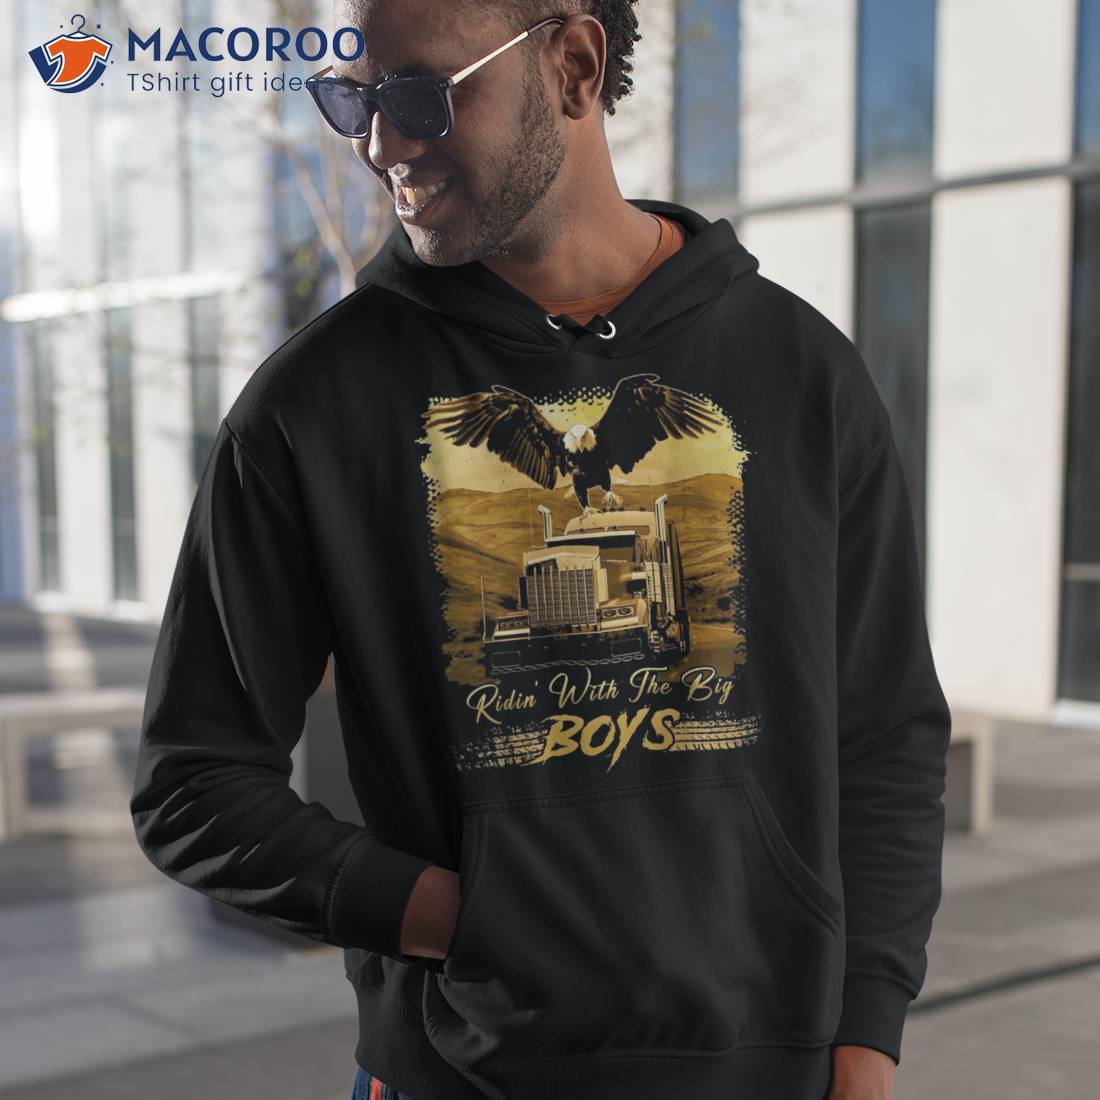 https://images.macoroo.com/wp-content/uploads/2023/05/ridin-with-the-big-boys-trucker-truck-drivers-gift-shirt-hoodie-1.jpg